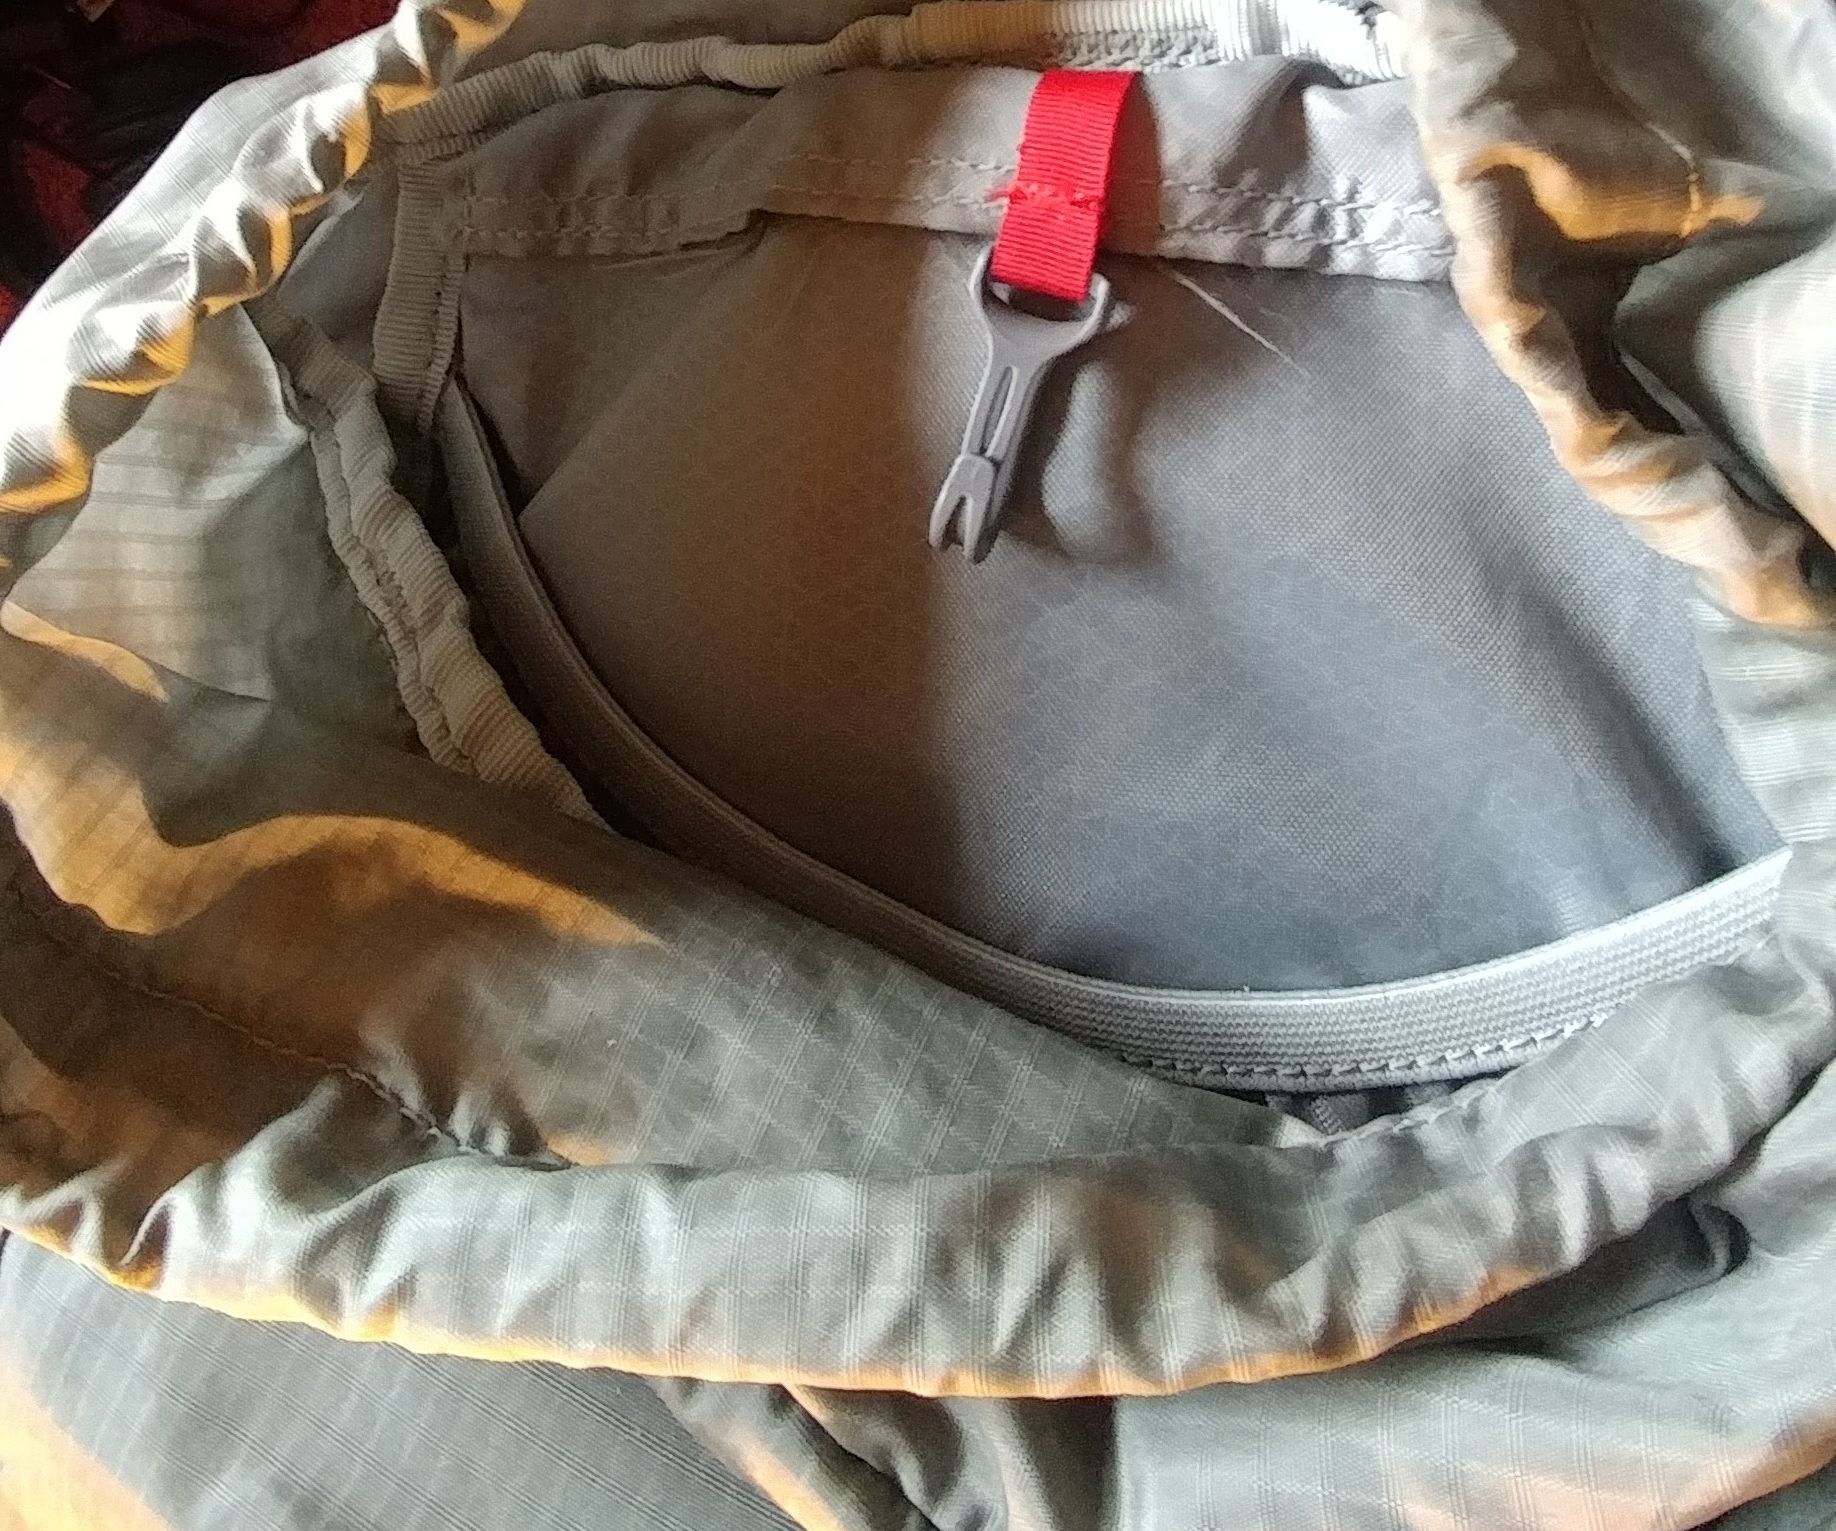 How to Convert a Backpack Into a Water Pack